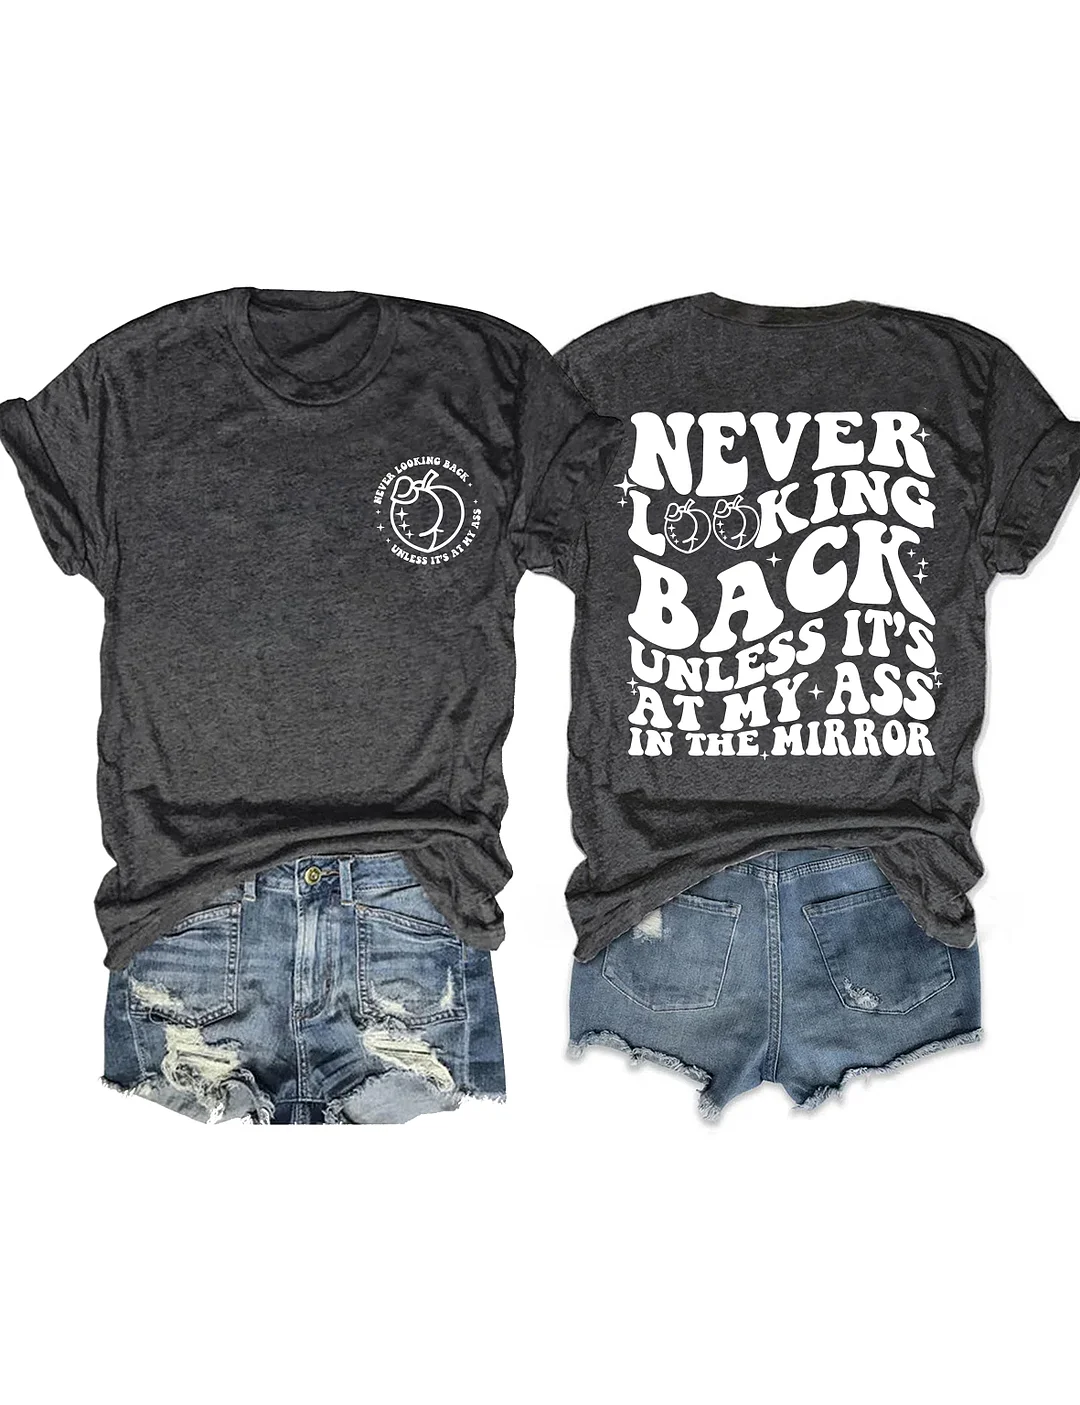 Never Looking Back Unless It's At My Ass In The Mirror T-shirt